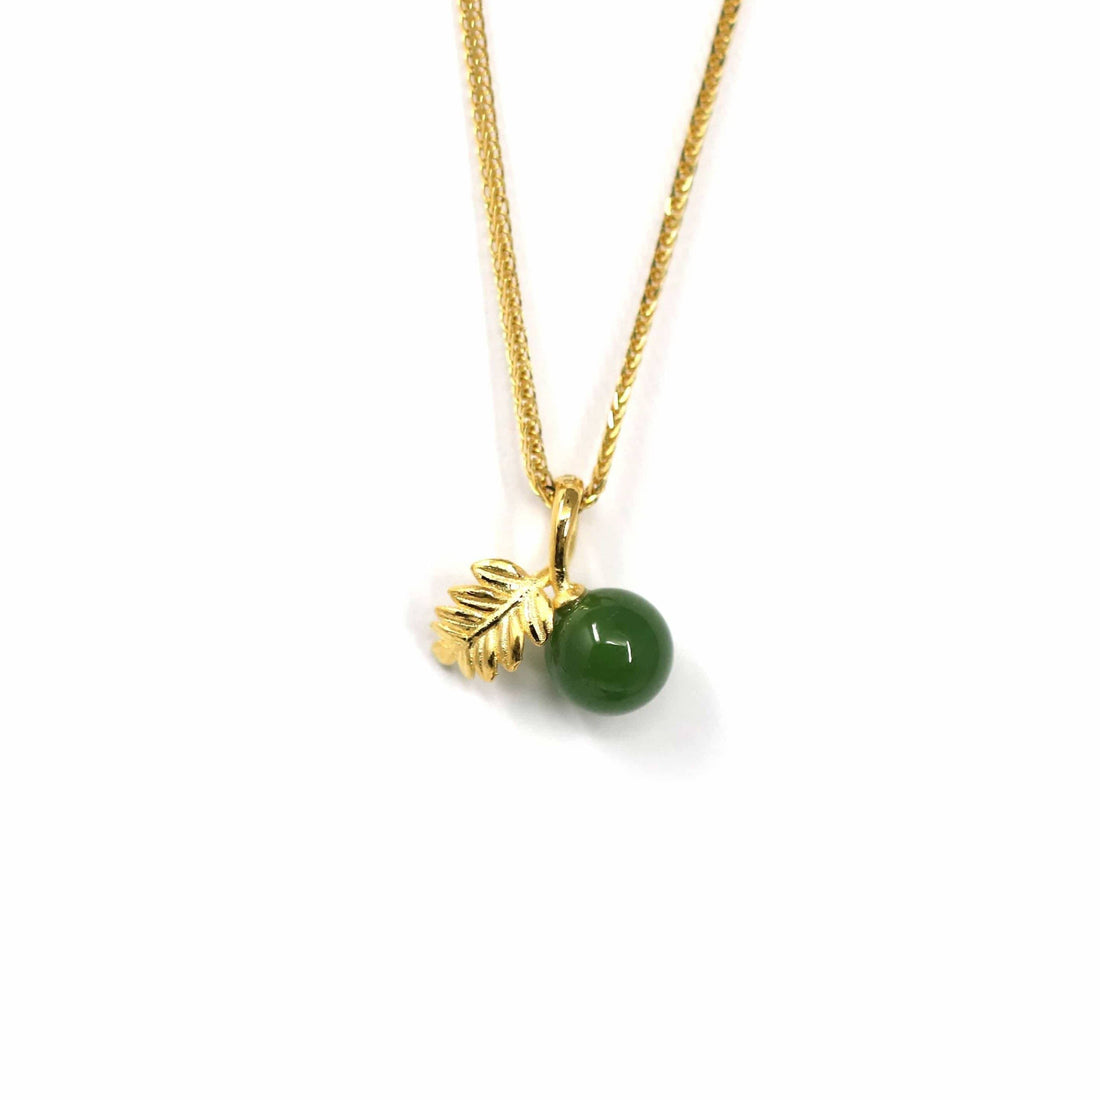 Baikalla Jewelry Gold Jade Necklace Nice Leaf 24k Yellow Gold Genuine Green Jade Bead With Leaf Pendant Necklace